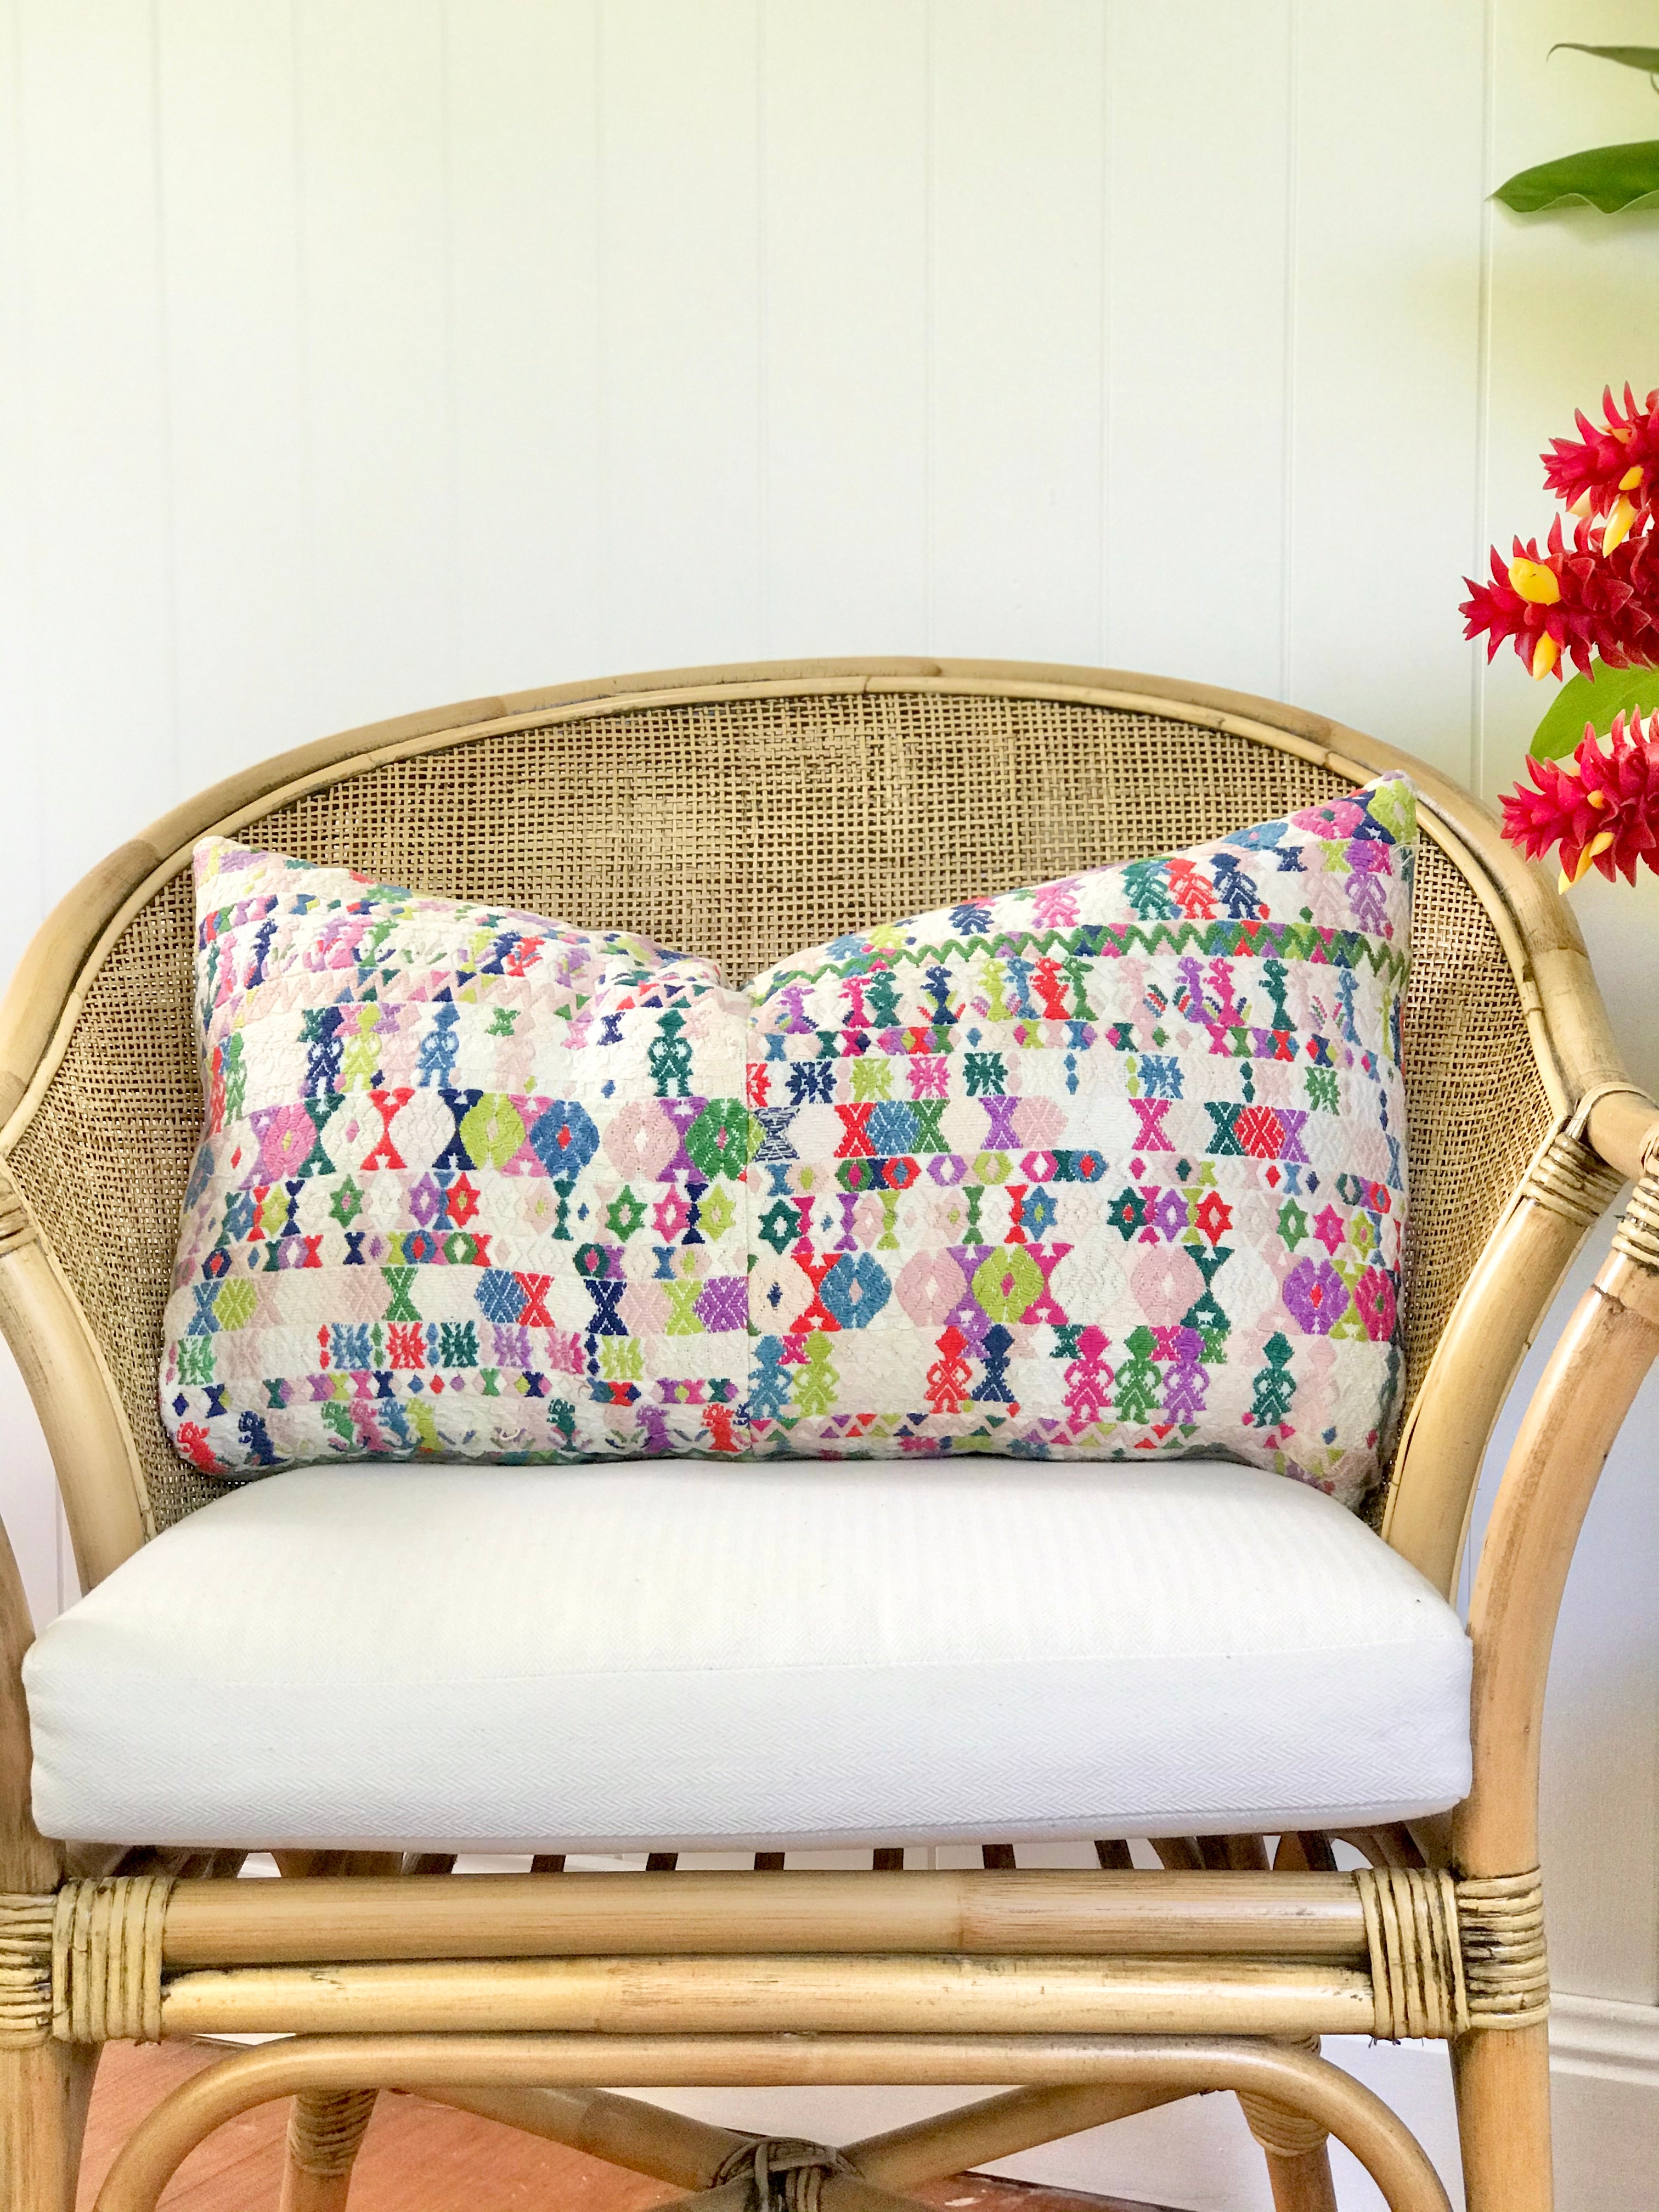 Guatemalan Huipil Textile Pillows, vintage, hand embroidered colourful bohemian cushion from Coban